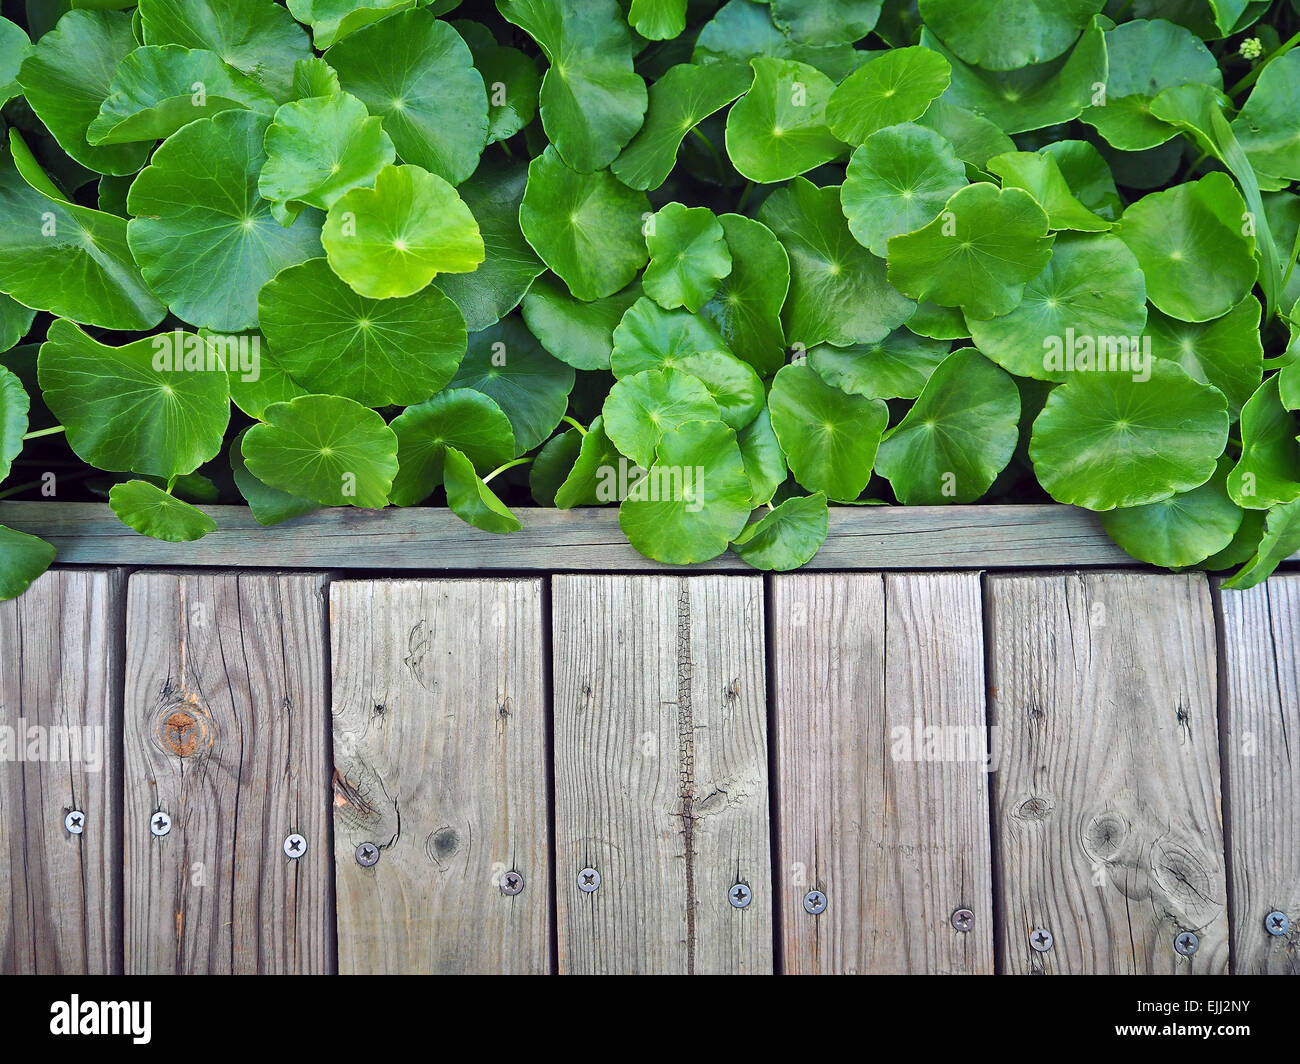 Wood Walkway and Asiatic Pennywort, Centella Asiatica Stock Photo